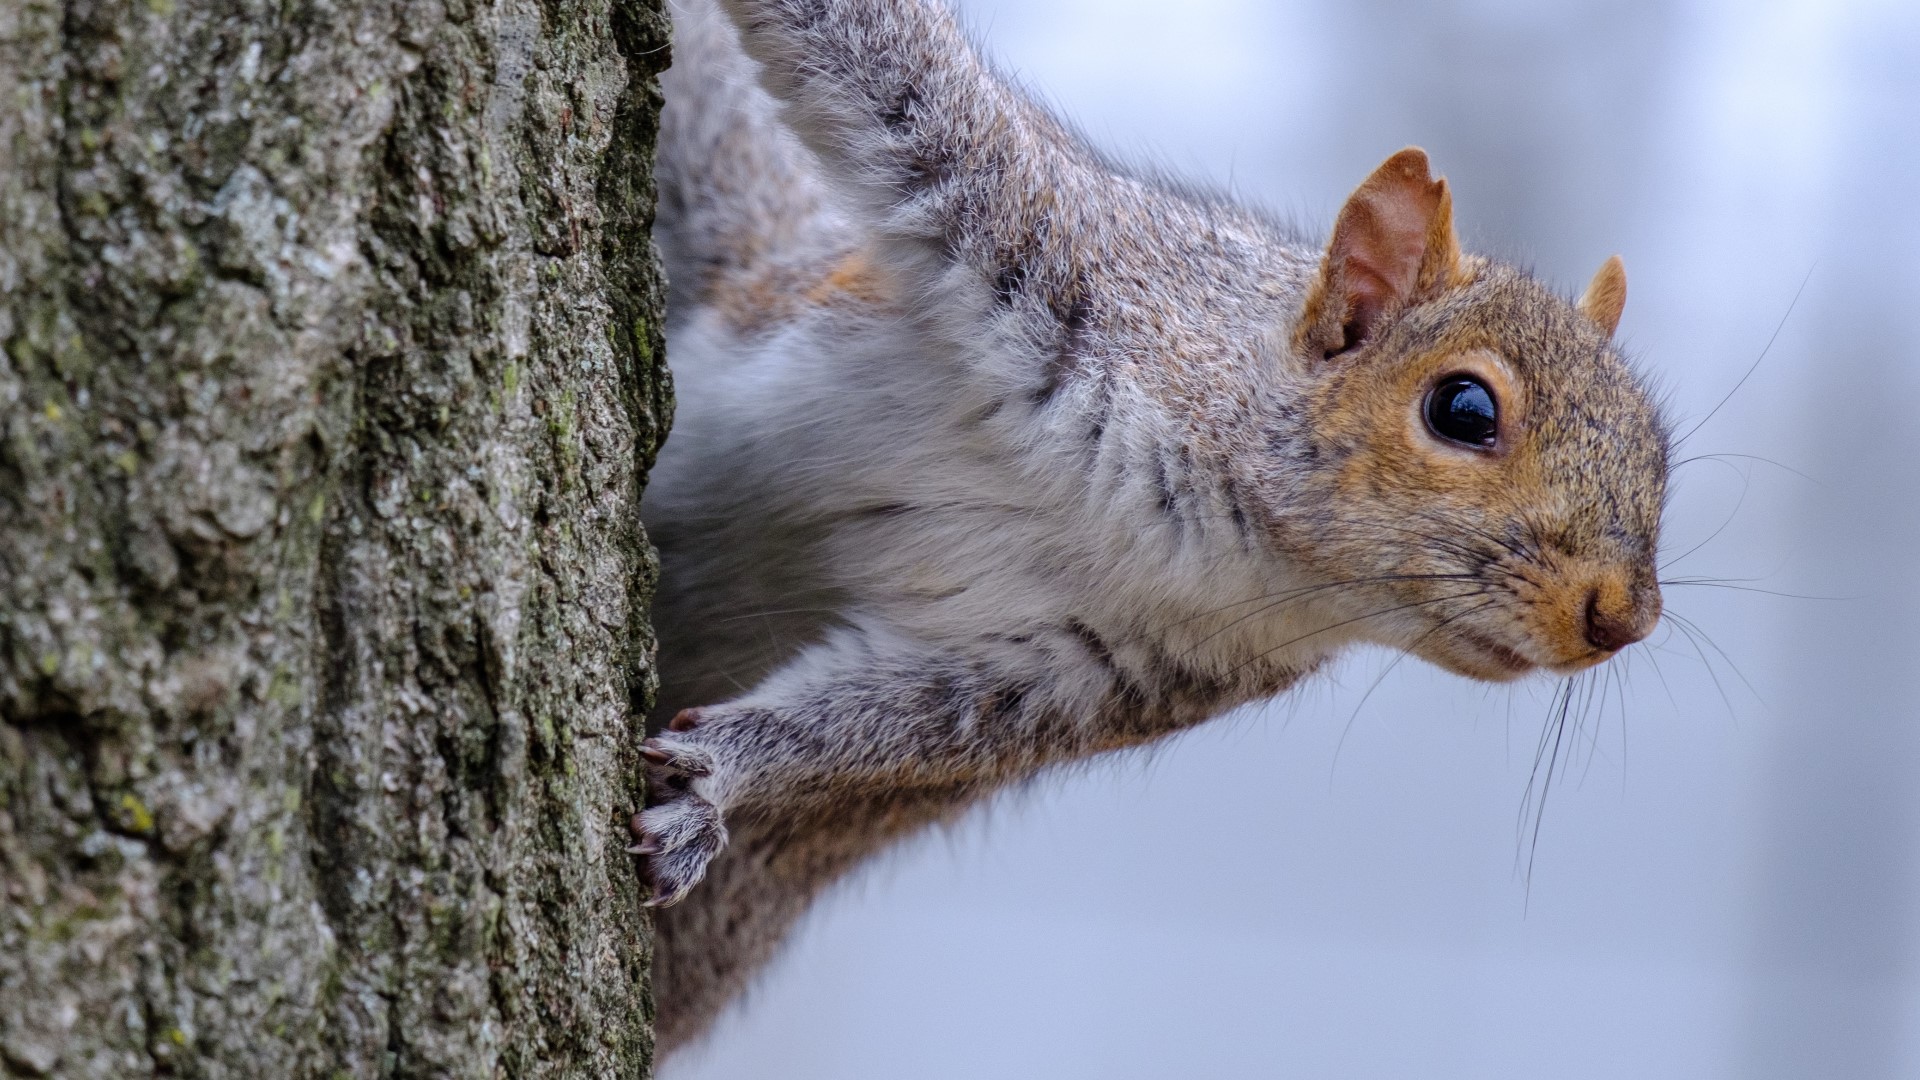 Arkansans are challenged to bag the 3 heaviest  squirrels they can before the end of January 14th.